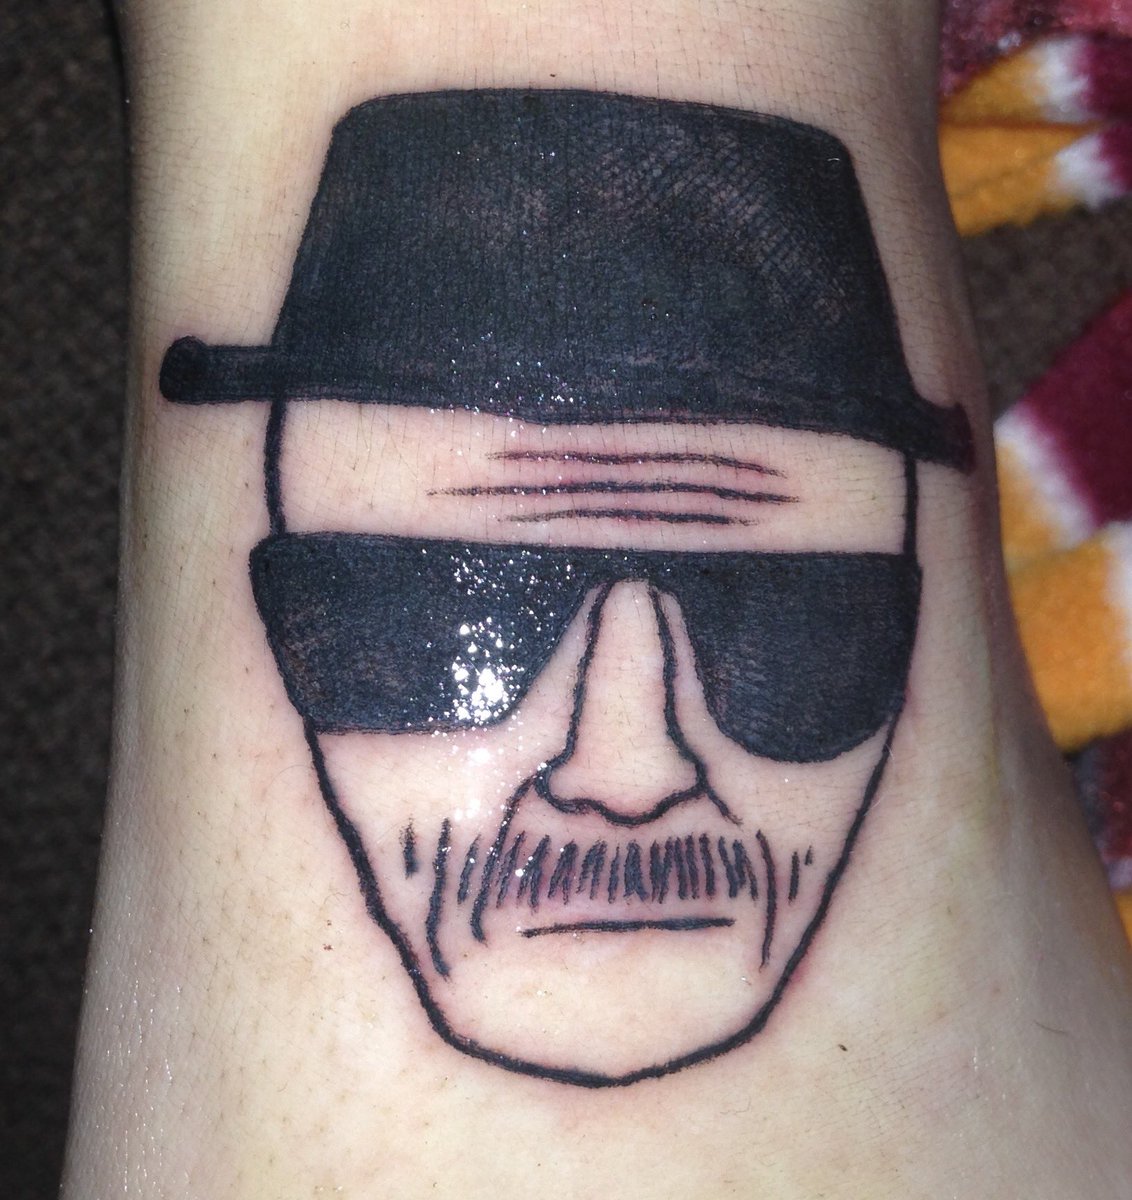 35 Epic Breaking Bad Tattoos That Will Want to Make You Cook